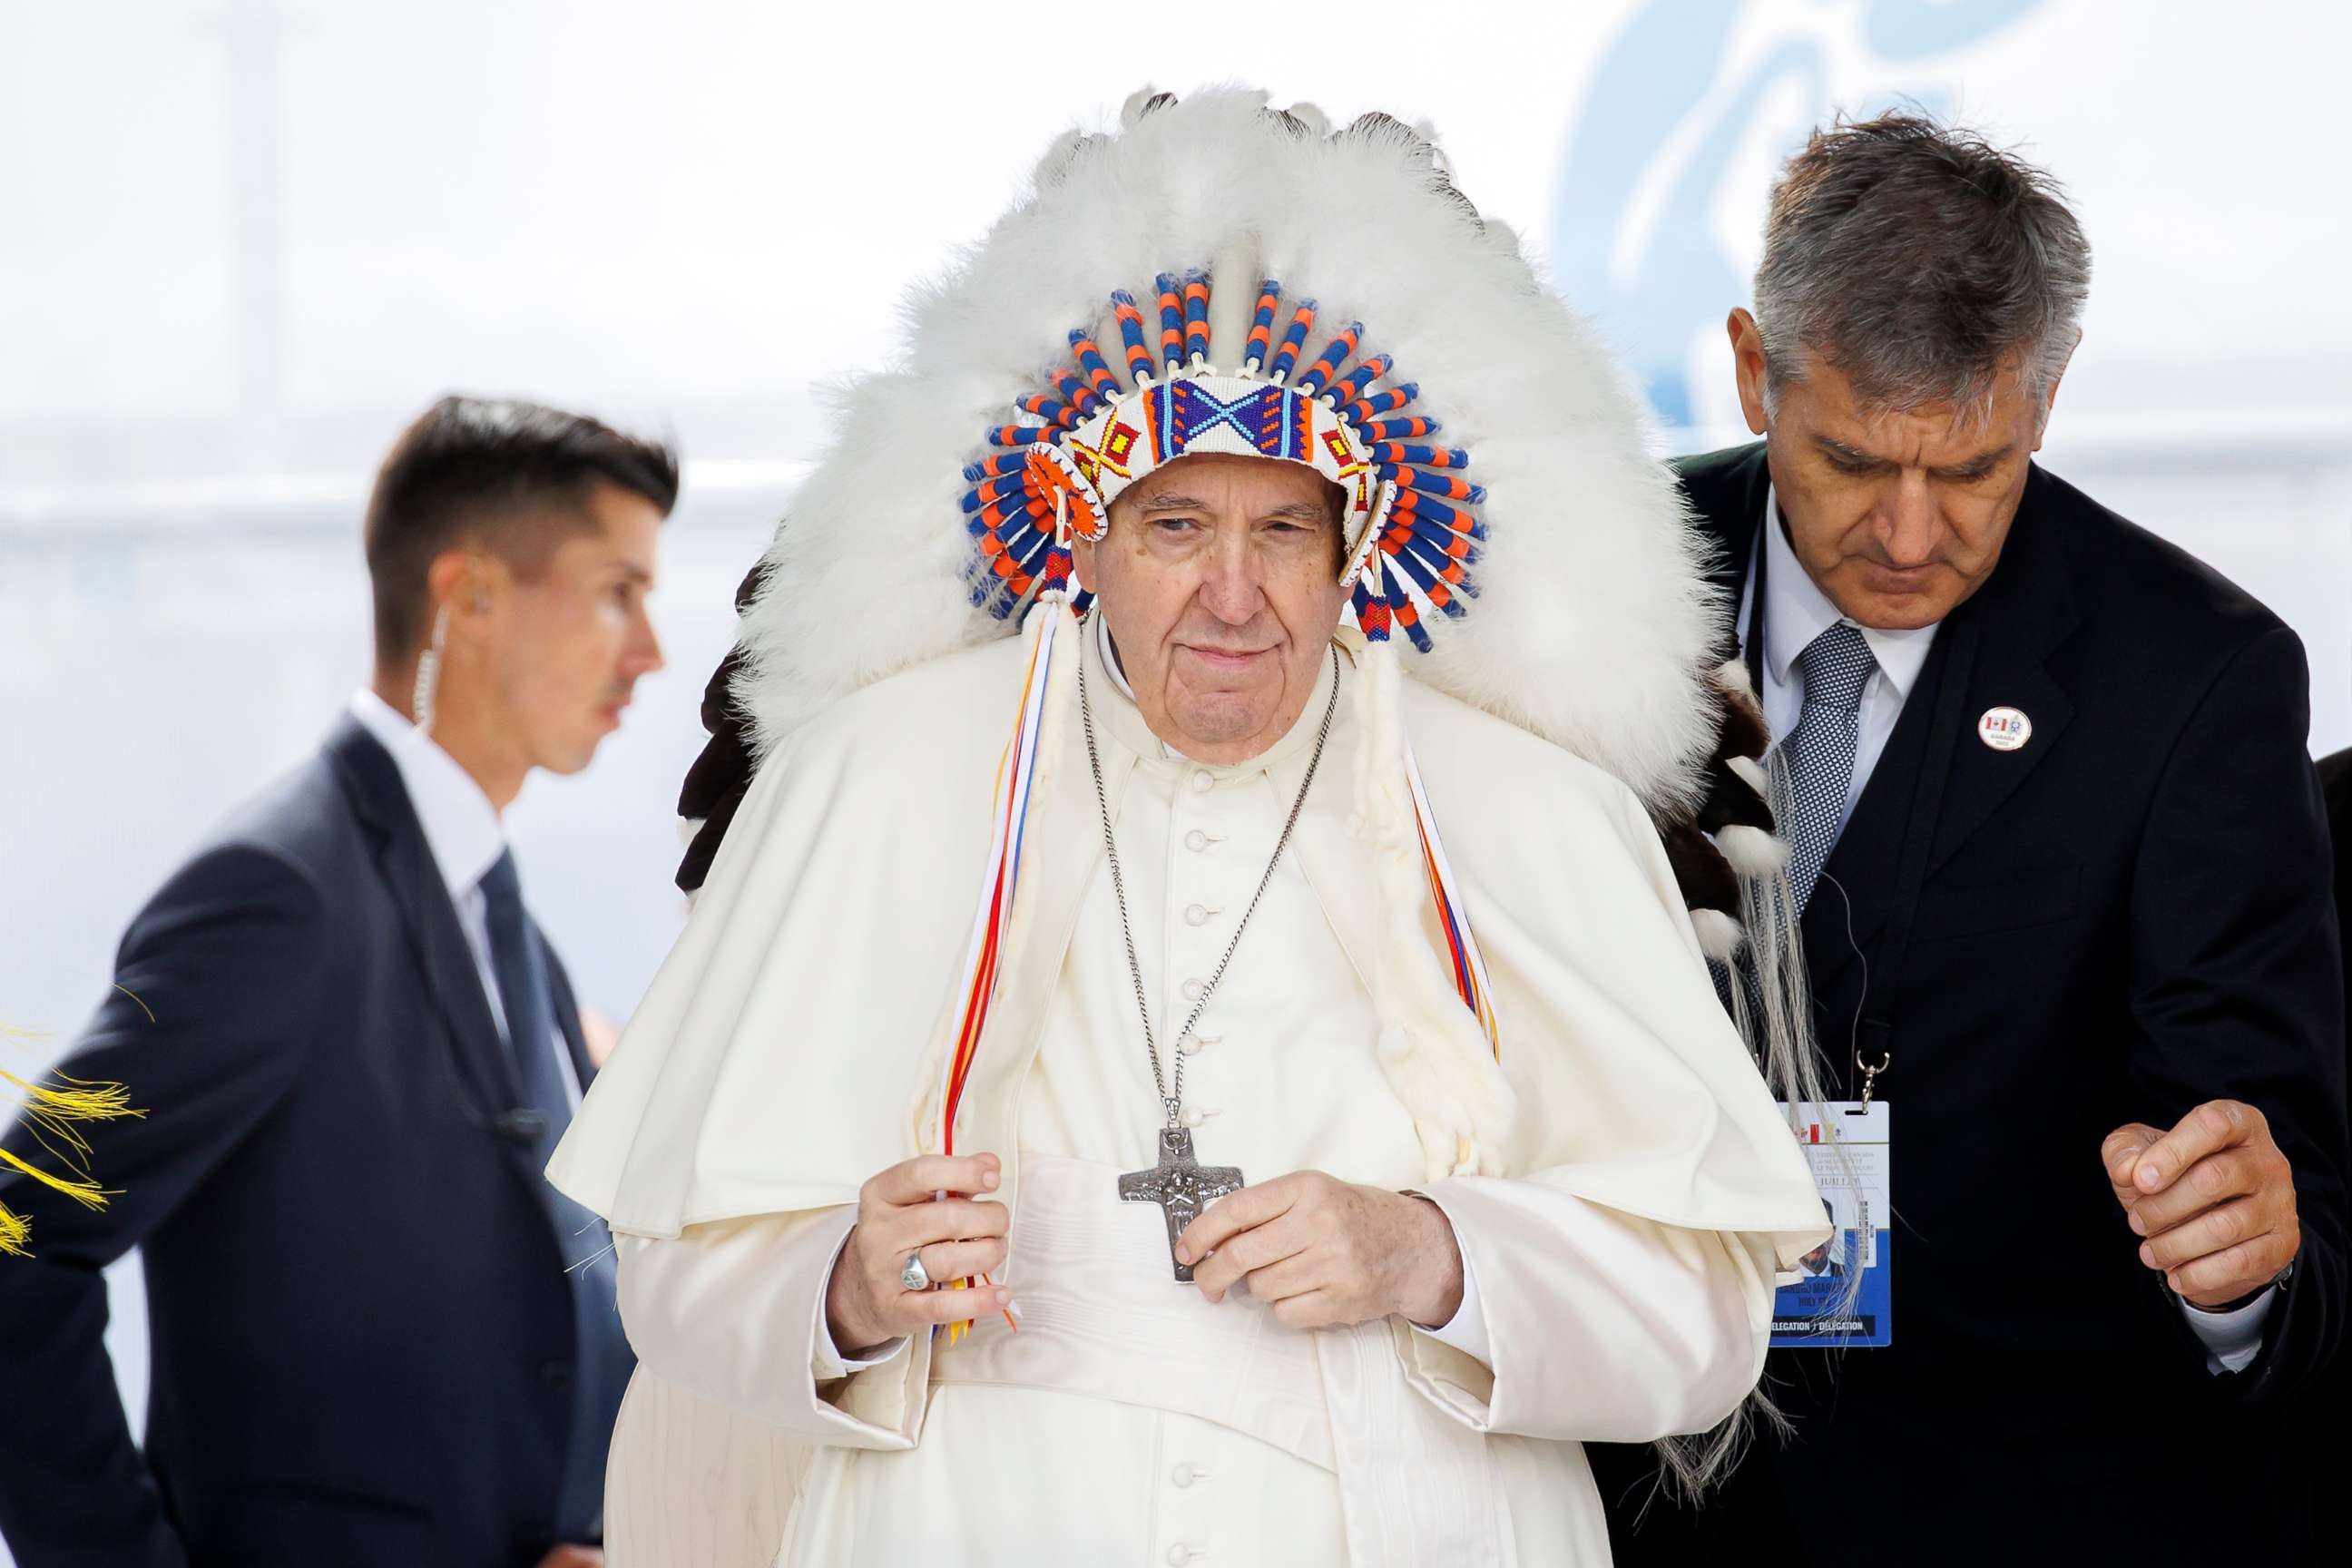 PHOTO: Pope Francis wears a traditional headdress that was gifted to him by Indigenous leaders following his apology during his visit on July 25, 2022 in Maskwacis, Canada.